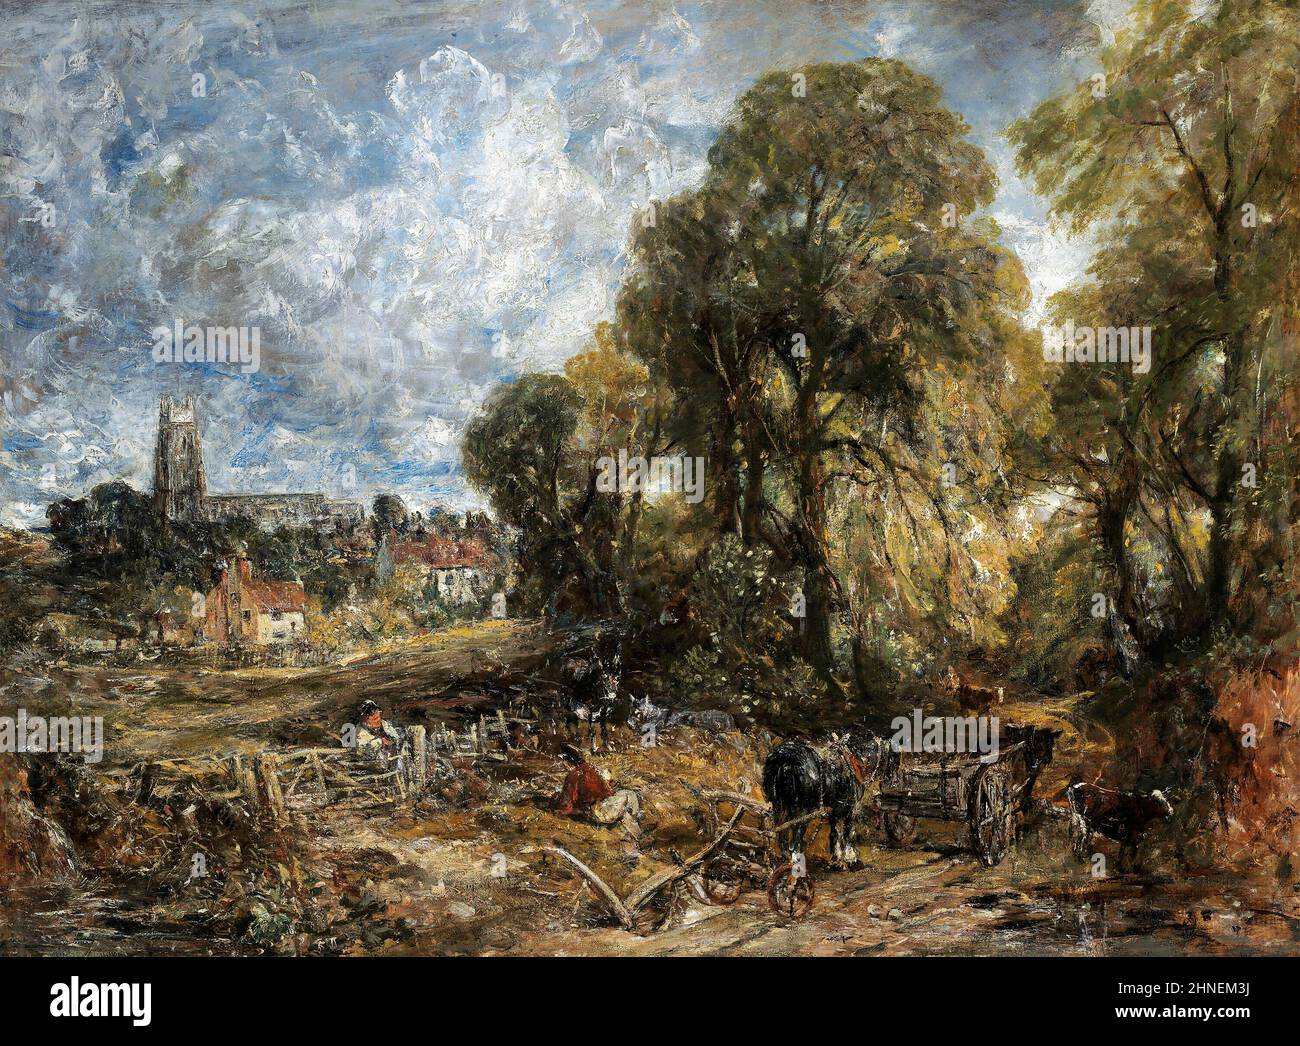 Stoke-by-Nayland by John Constable (1776-1837), oil on canvas, 1836 Stock Photo